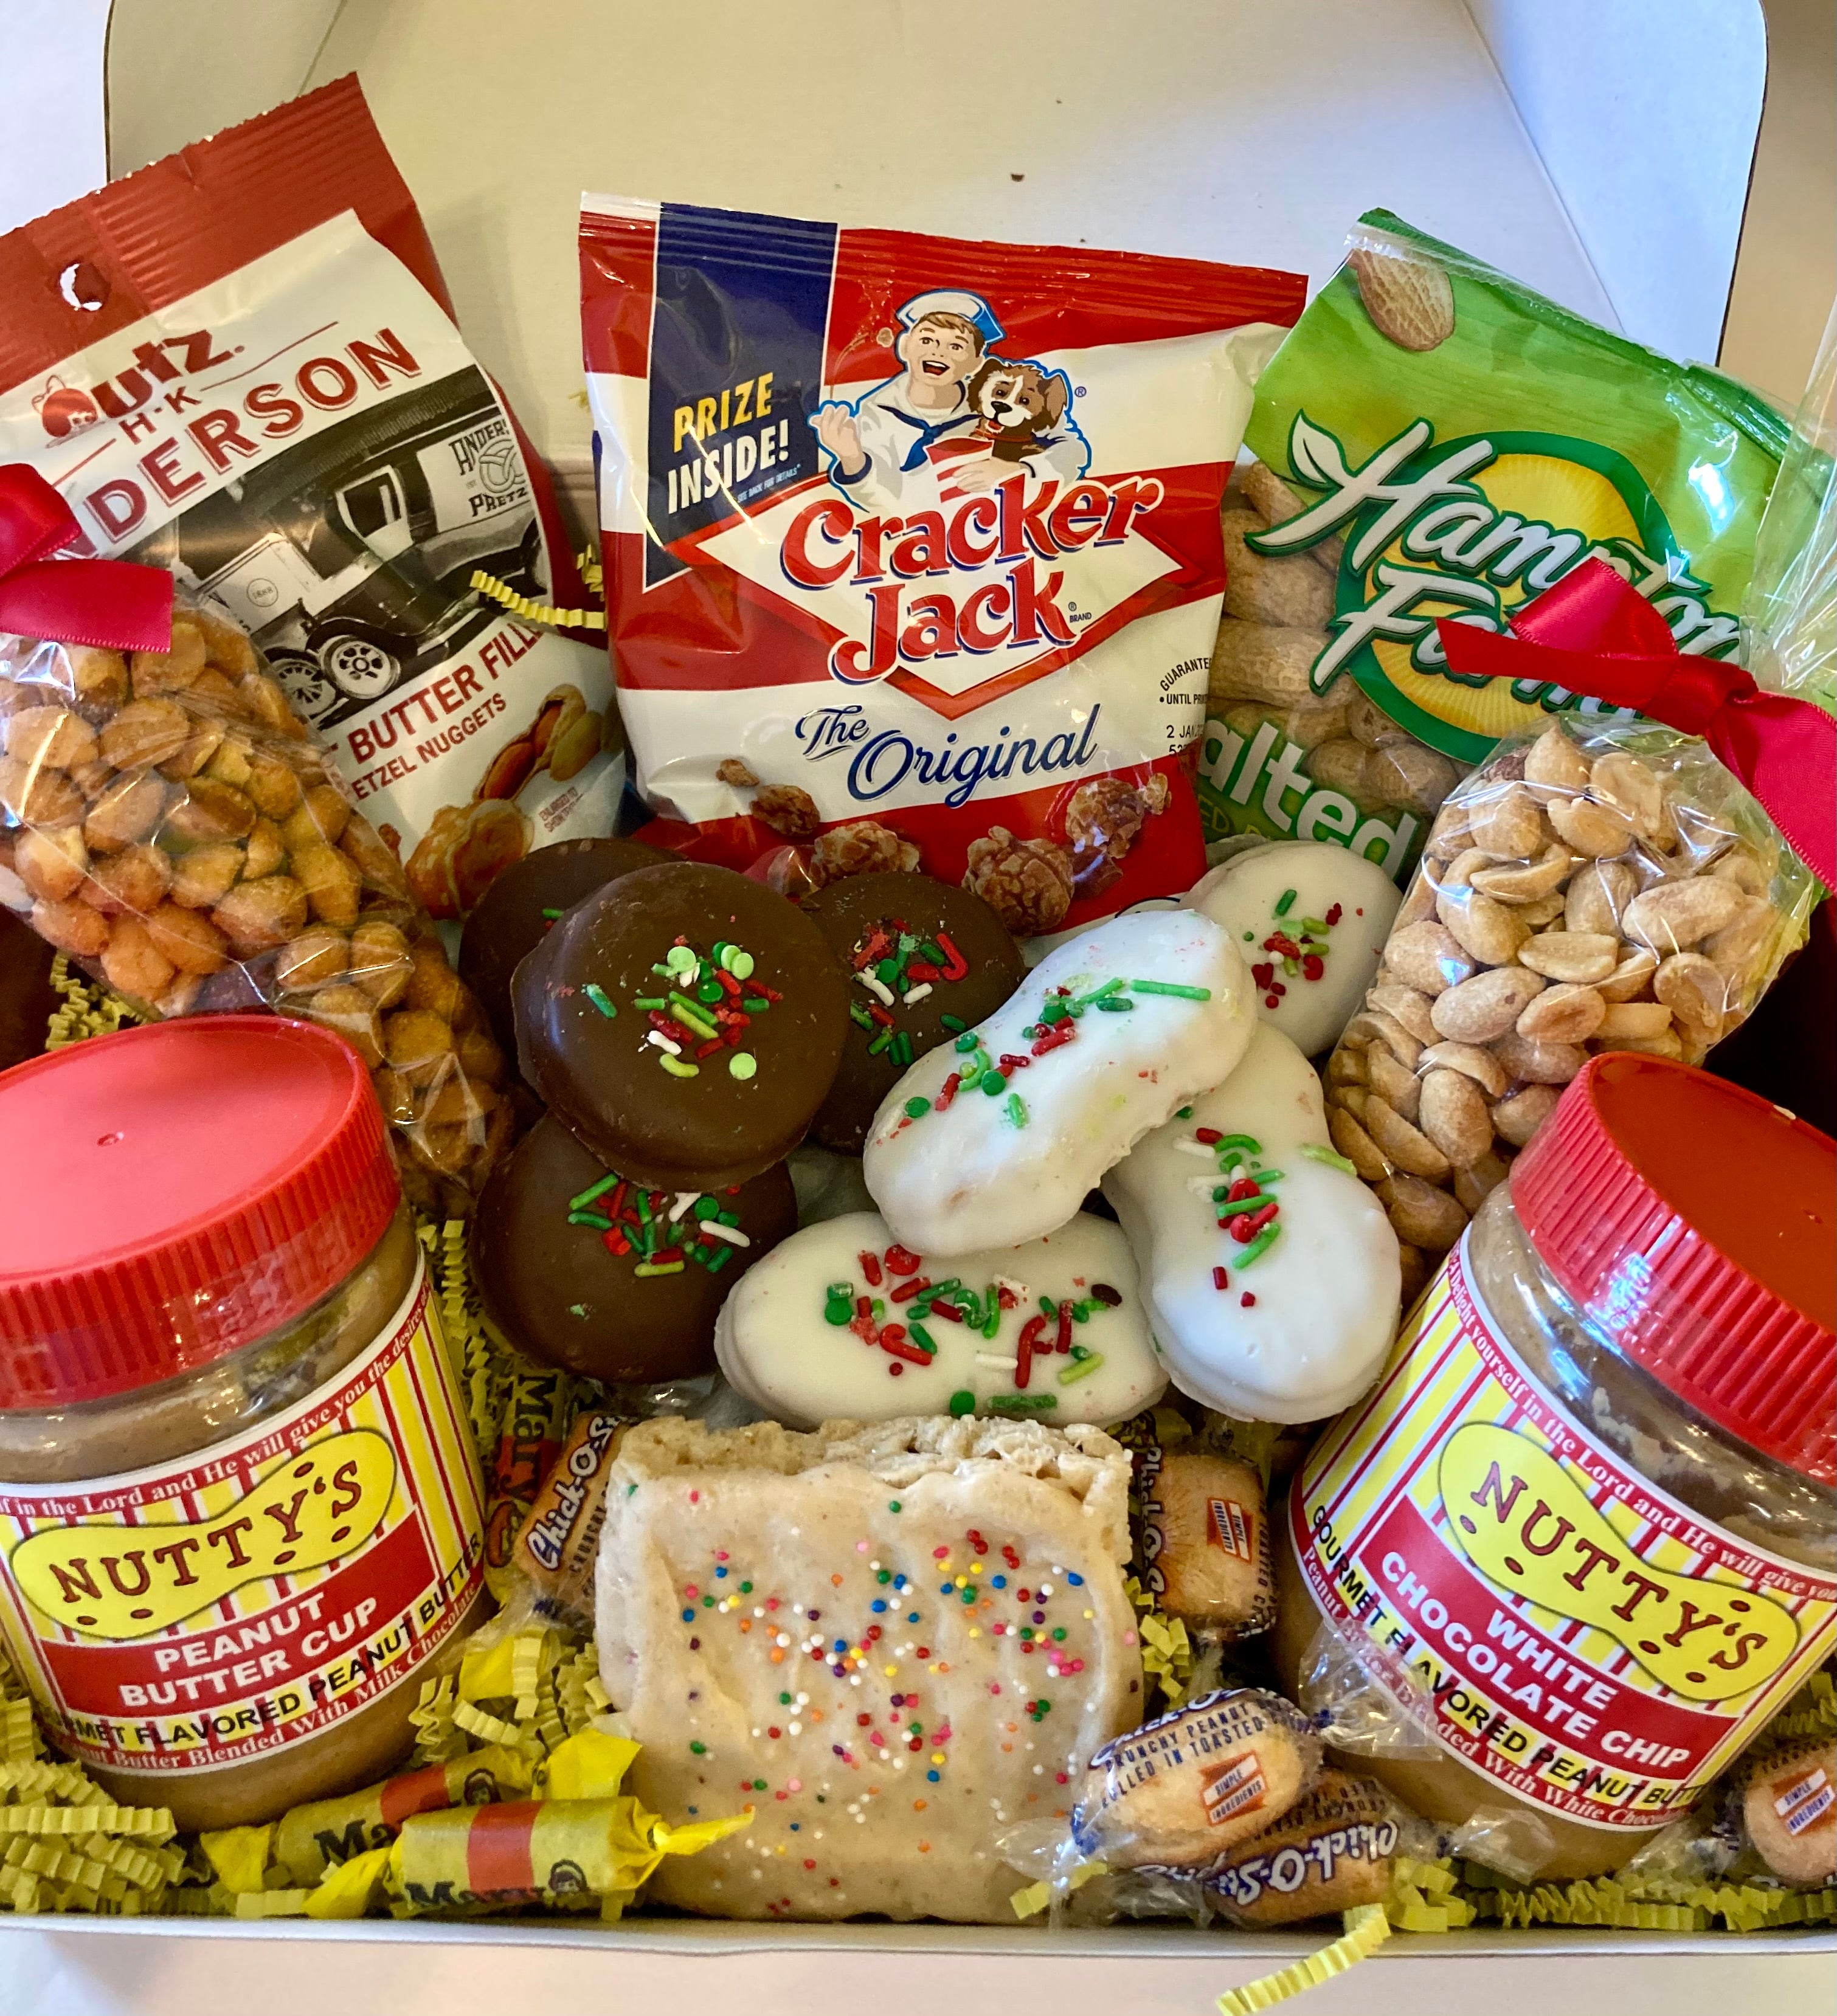 Nutty's Peanut Butter Holiday Box